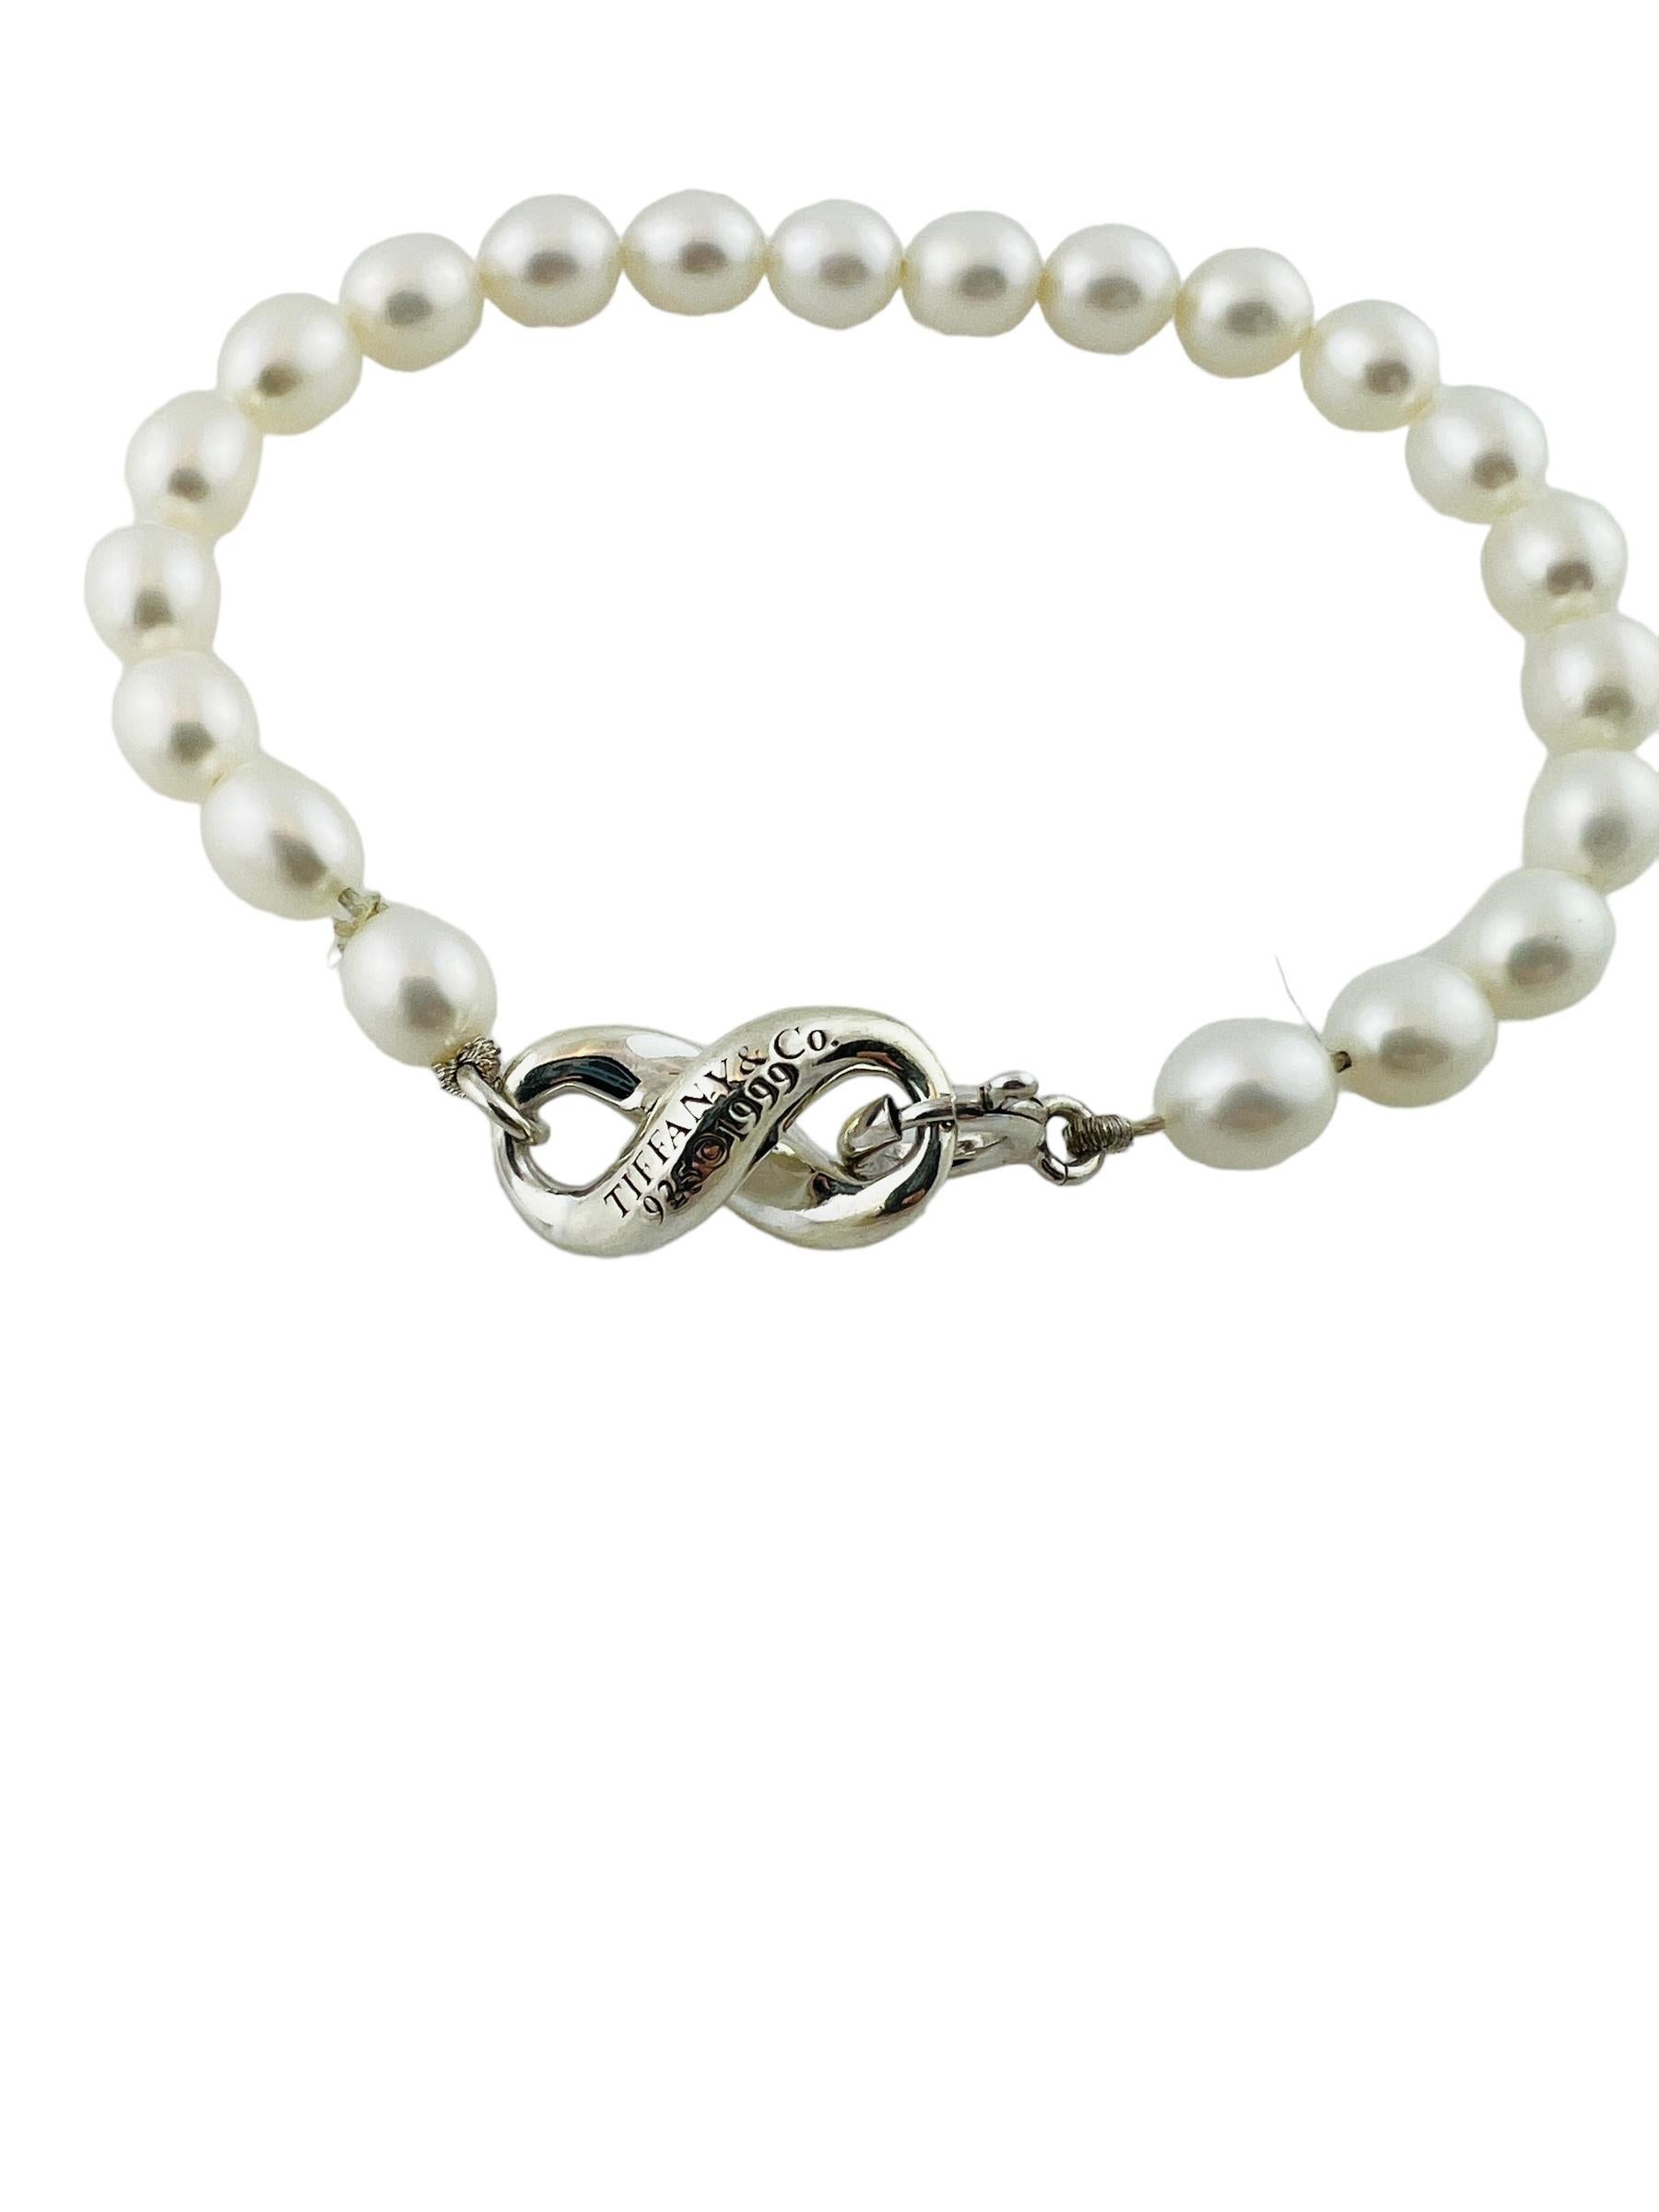 1999 Tiffany & Co Sterling Silver Infinity Figure 8 Pearl Bracelet

This gorgeous sterling silver infinity figure 8 bracelet features 21 beautiful pearls.

Pearls approximately 6.4mm each

Length: 6.75